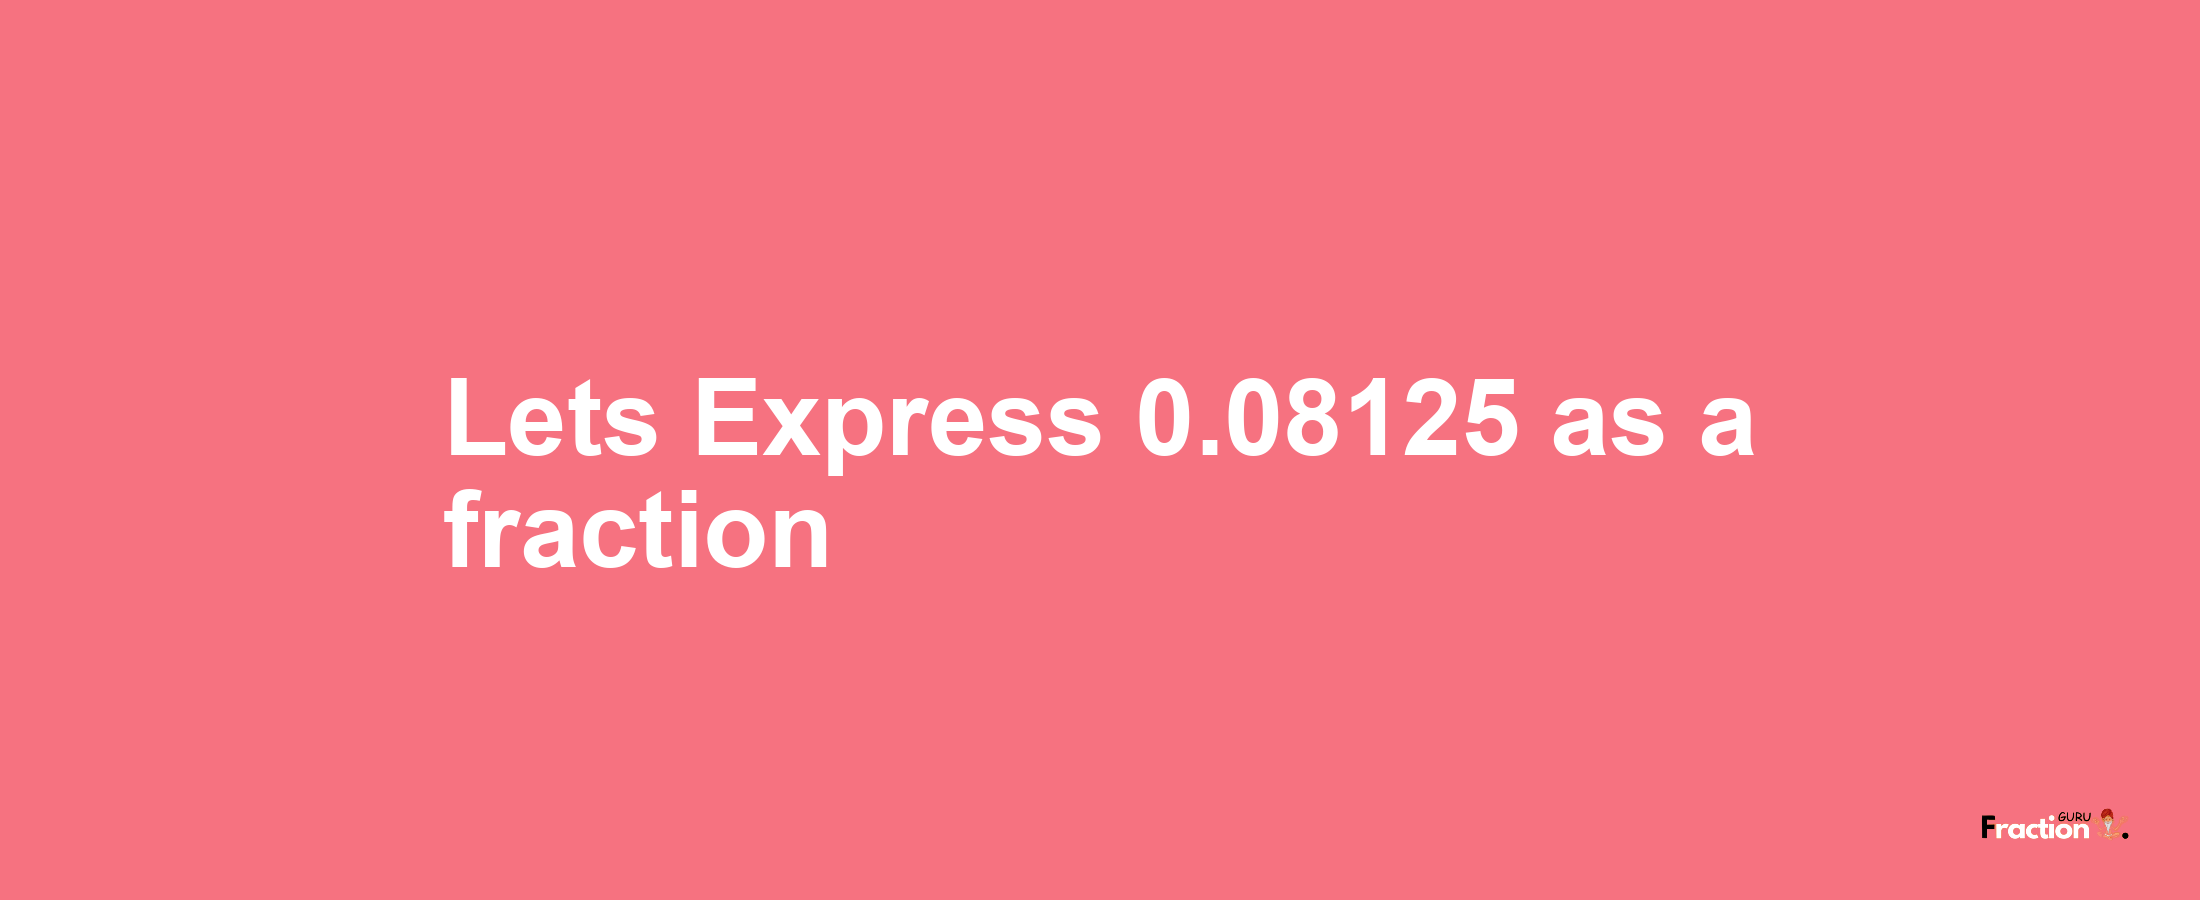 Lets Express 0.08125 as afraction